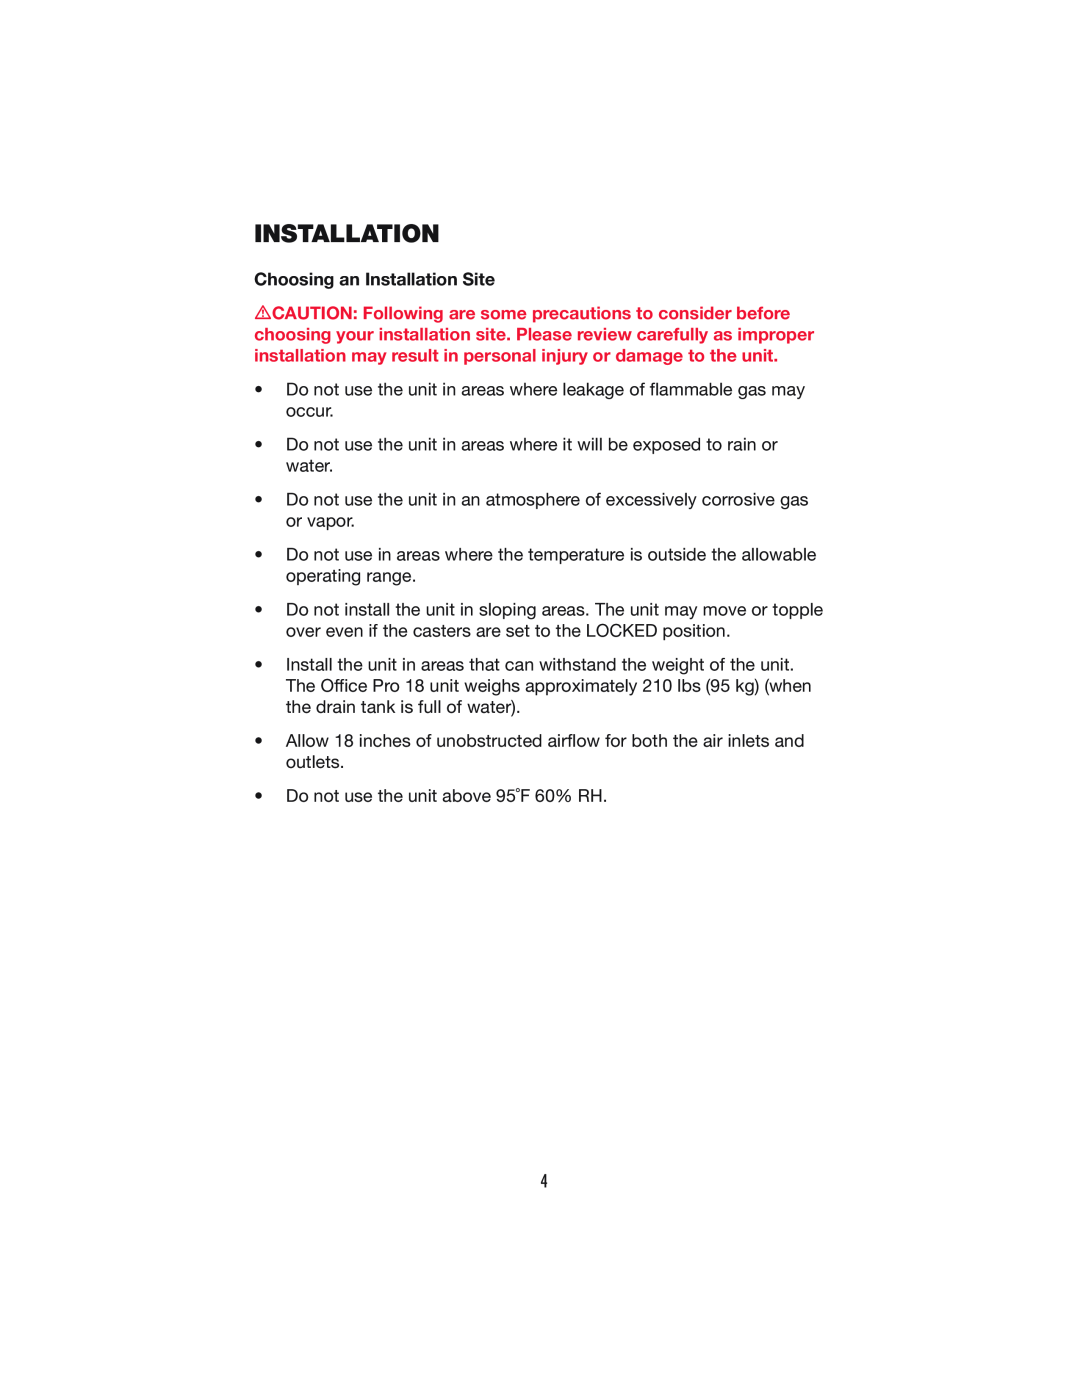 Denso PRO 18 operation manual Choosing an Installation Site 